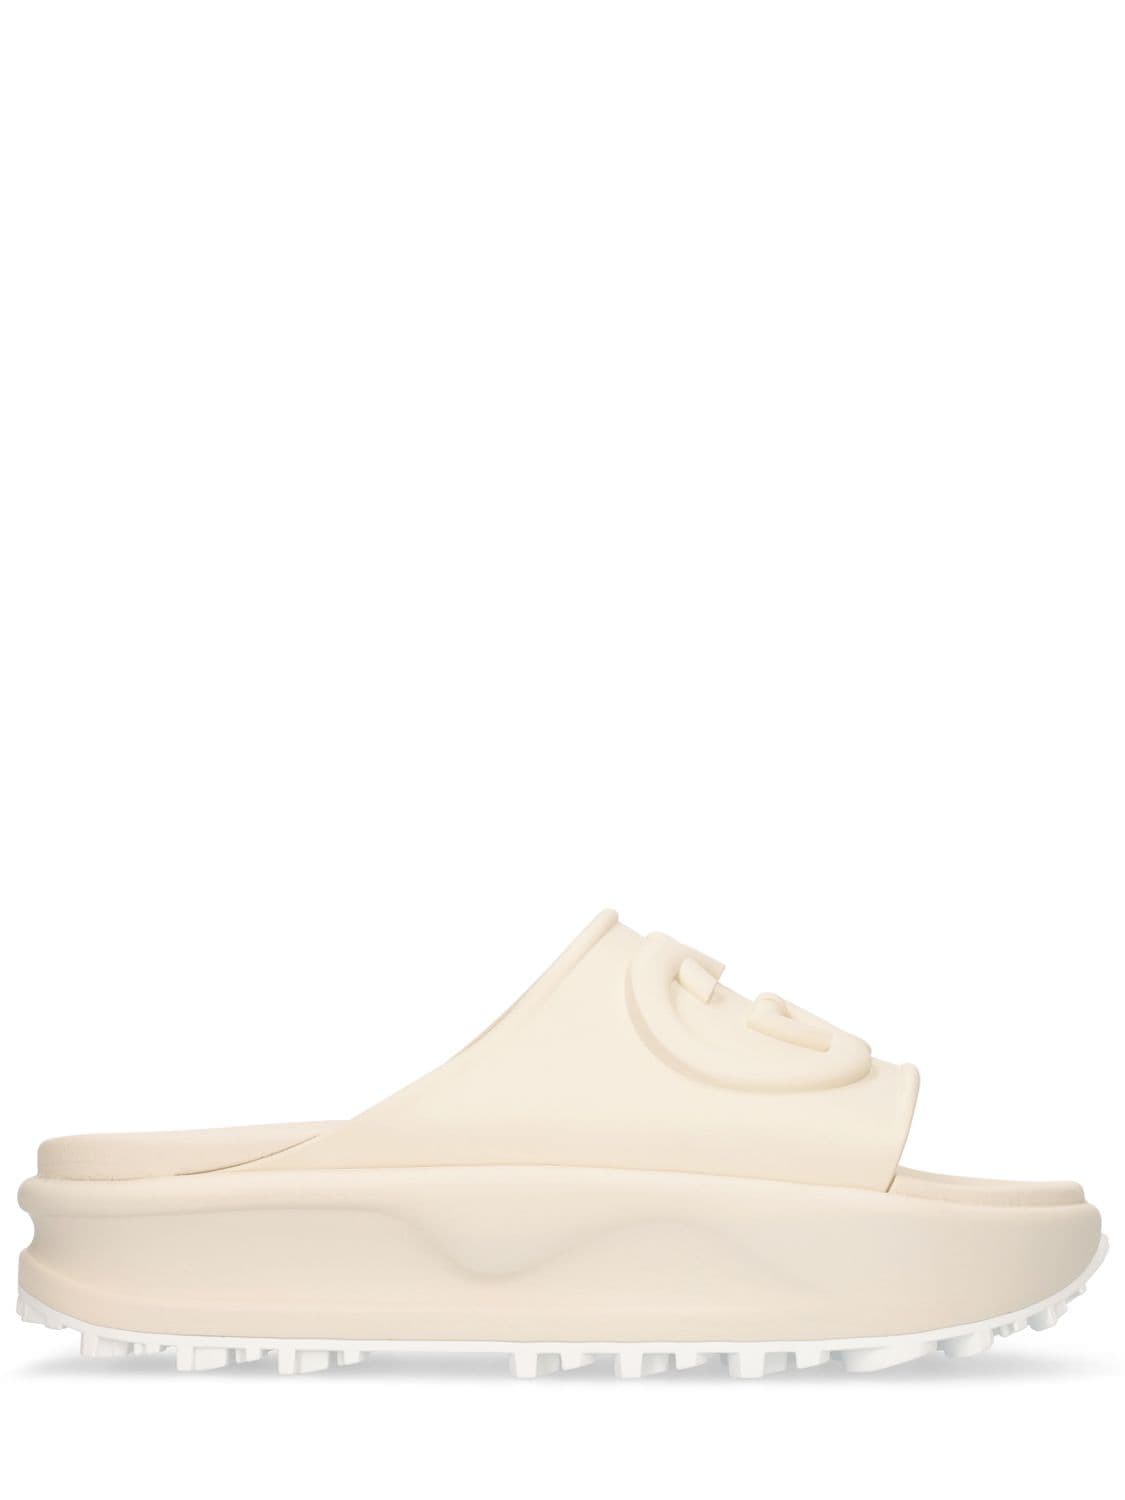 Gucci 40mm Miami Rubber Wedge Sandals In Off White